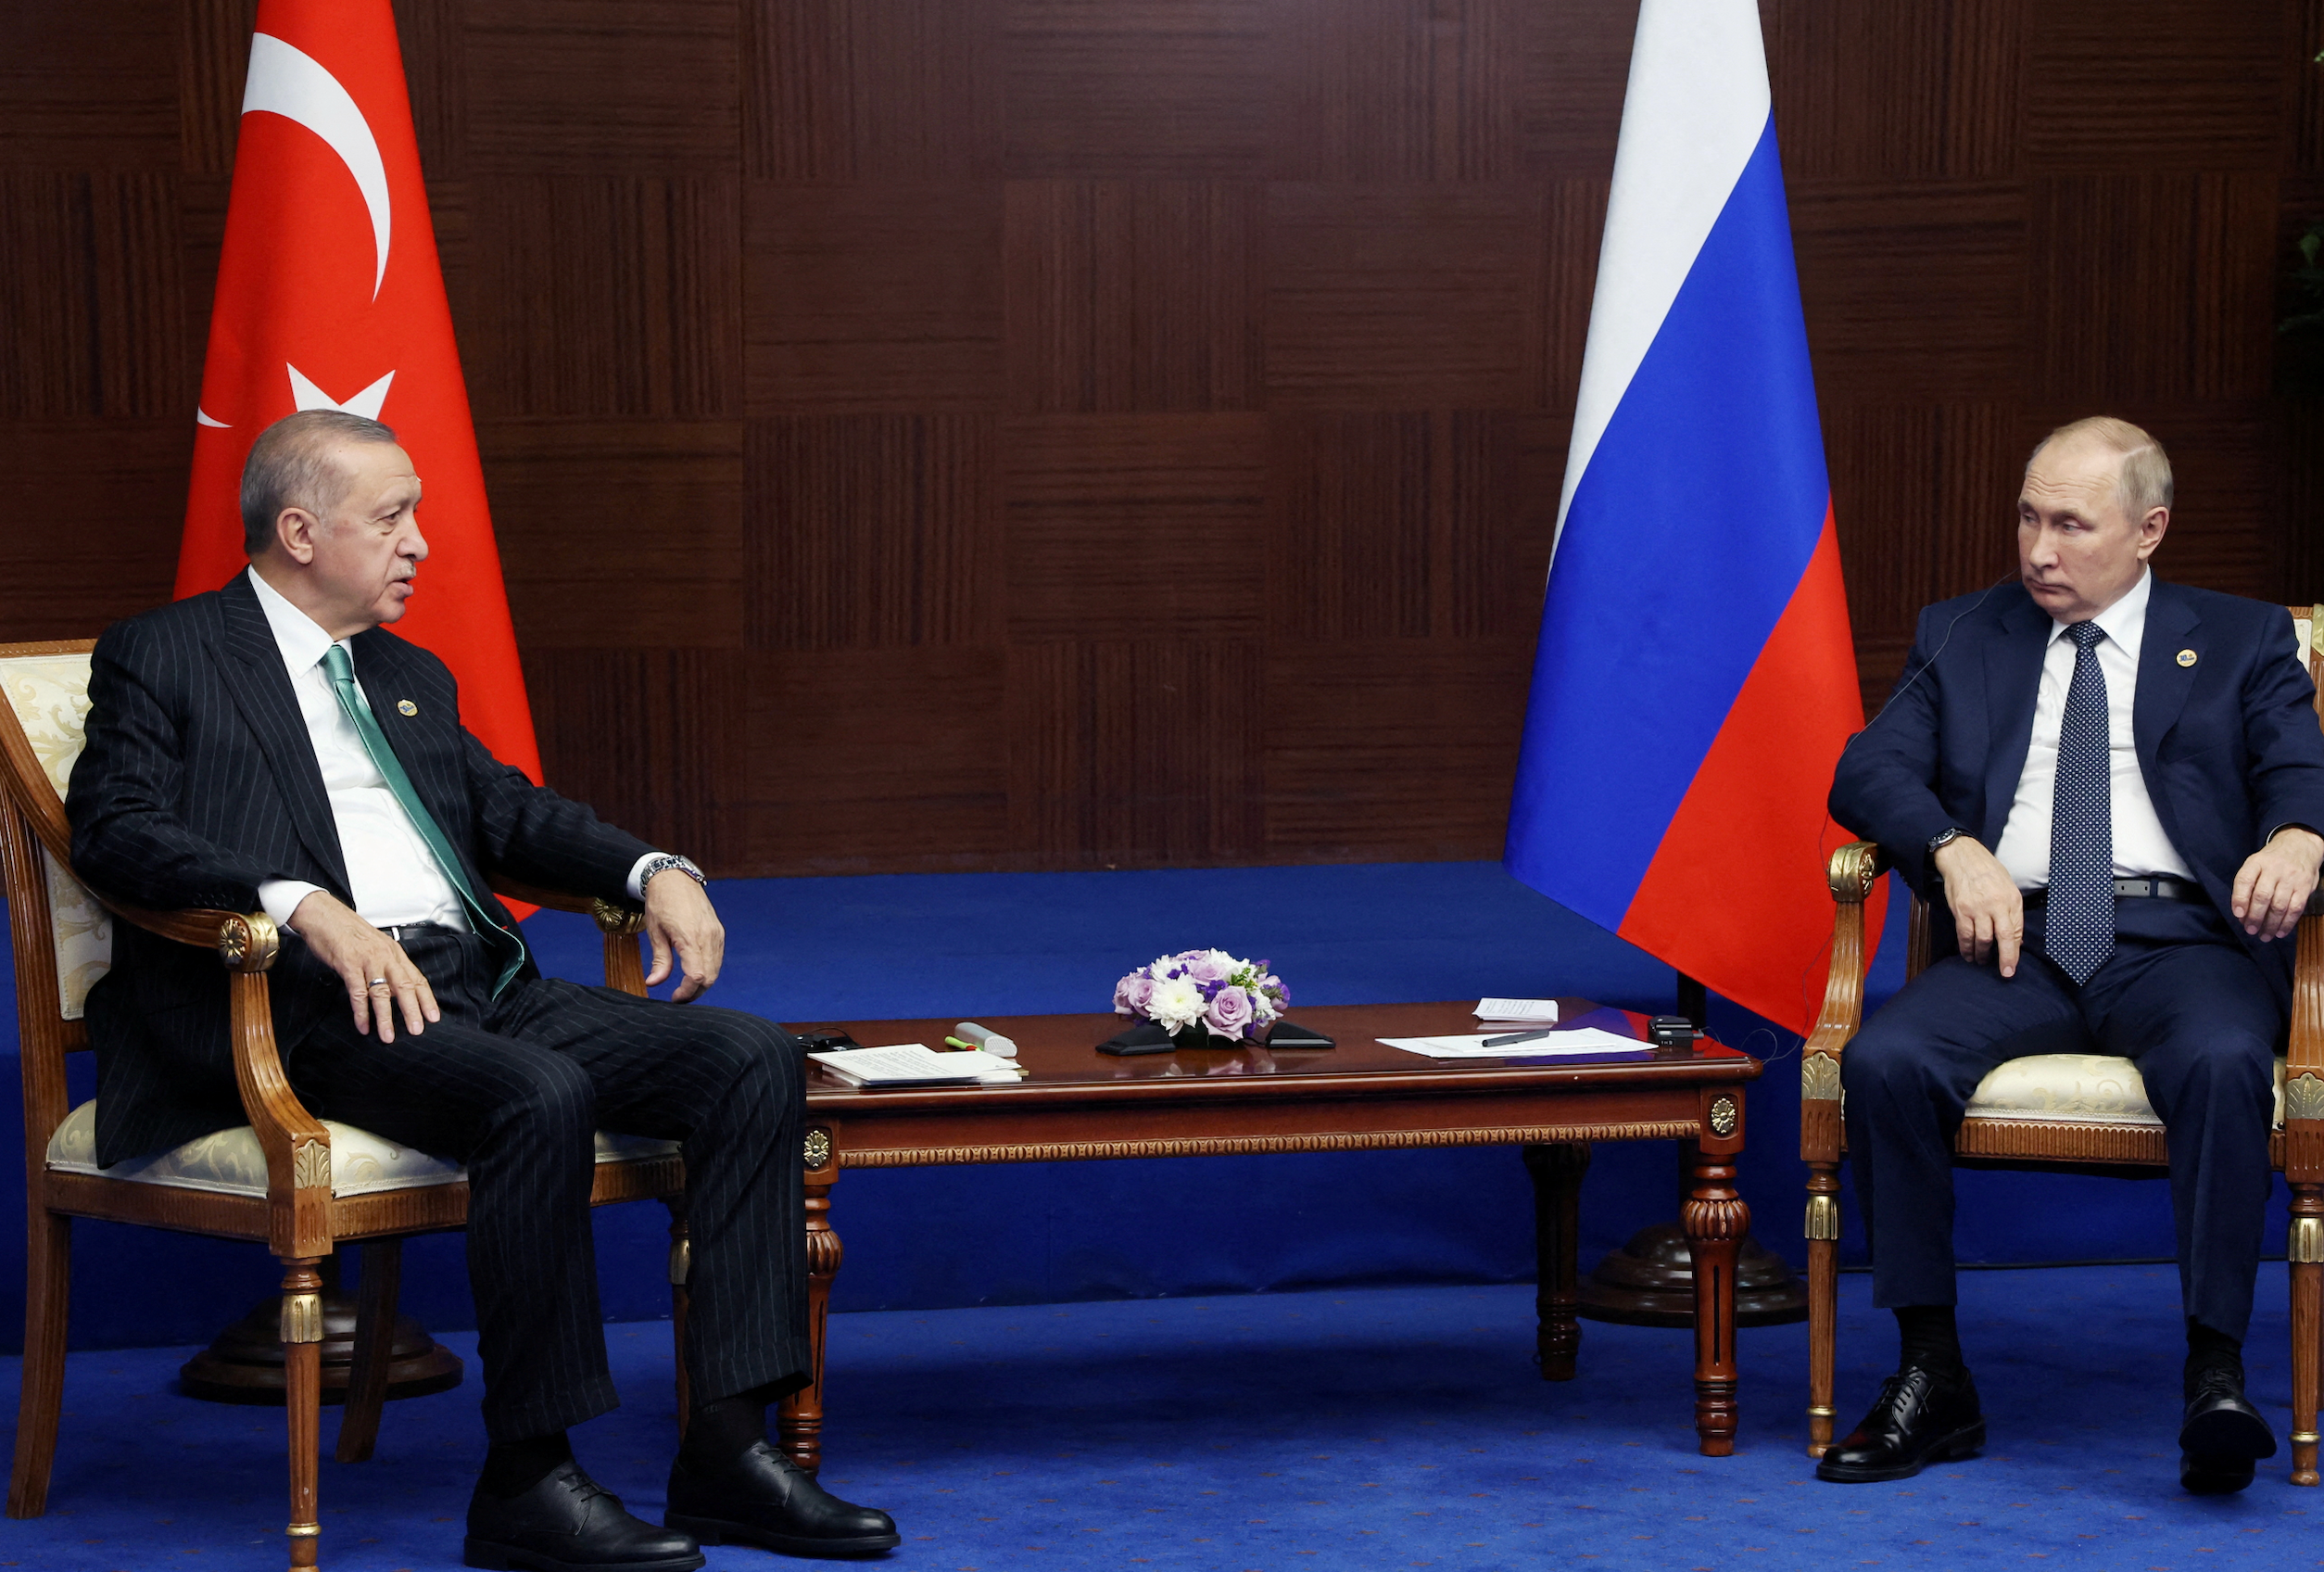 Russia's President Vladimir Putin and Turkey's President Tayyip Erdogan meet on the sidelines of the 6th summit of the Conference on Interaction and Confidence-building Measures in Asia